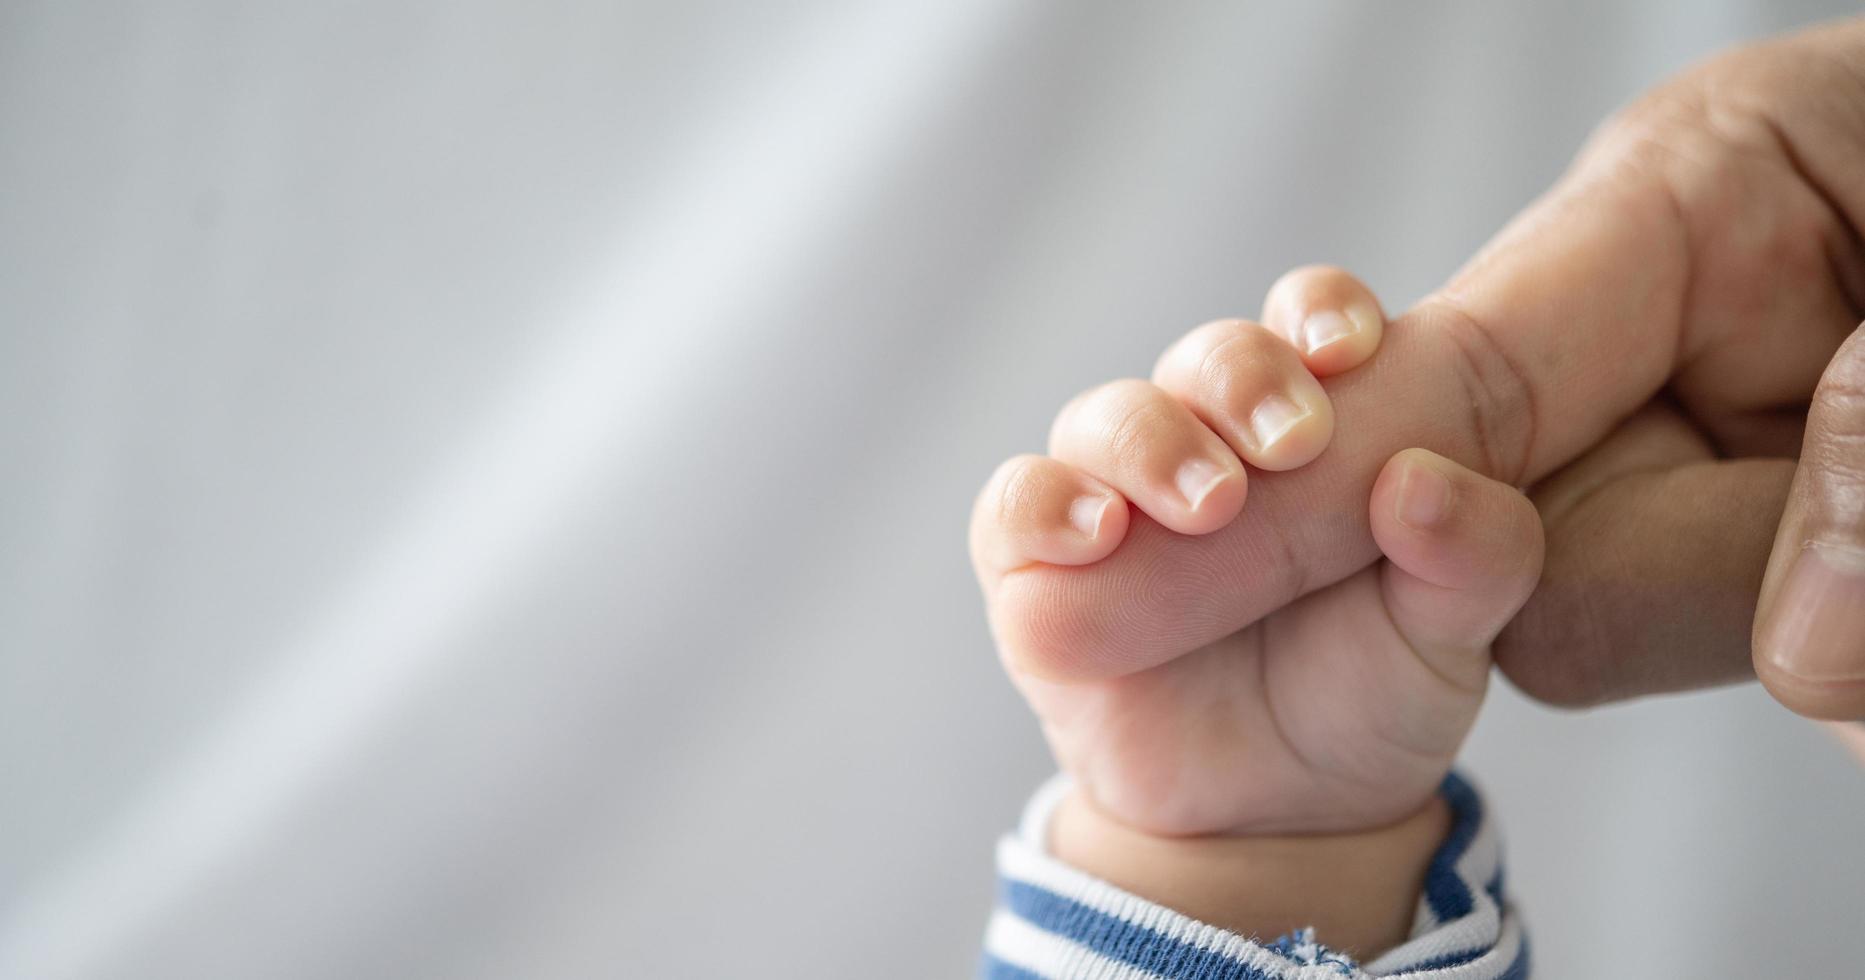 The hand of the newborn baby holds the fingers of the mother photo